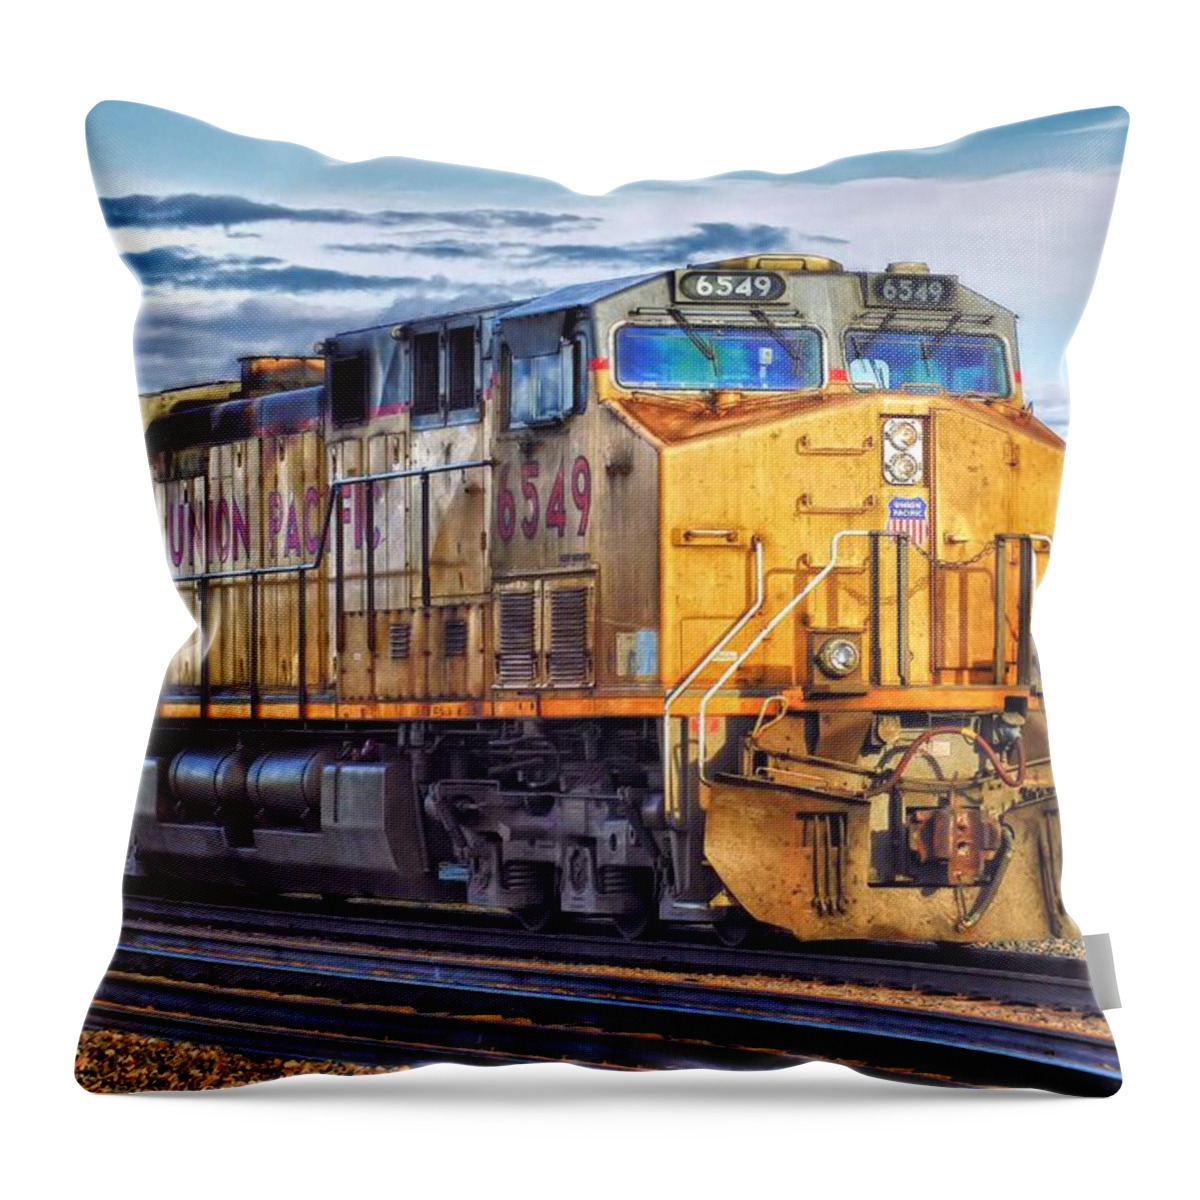 Locomotive Throw Pillow featuring the photograph Up 6549 by Bill Kesler